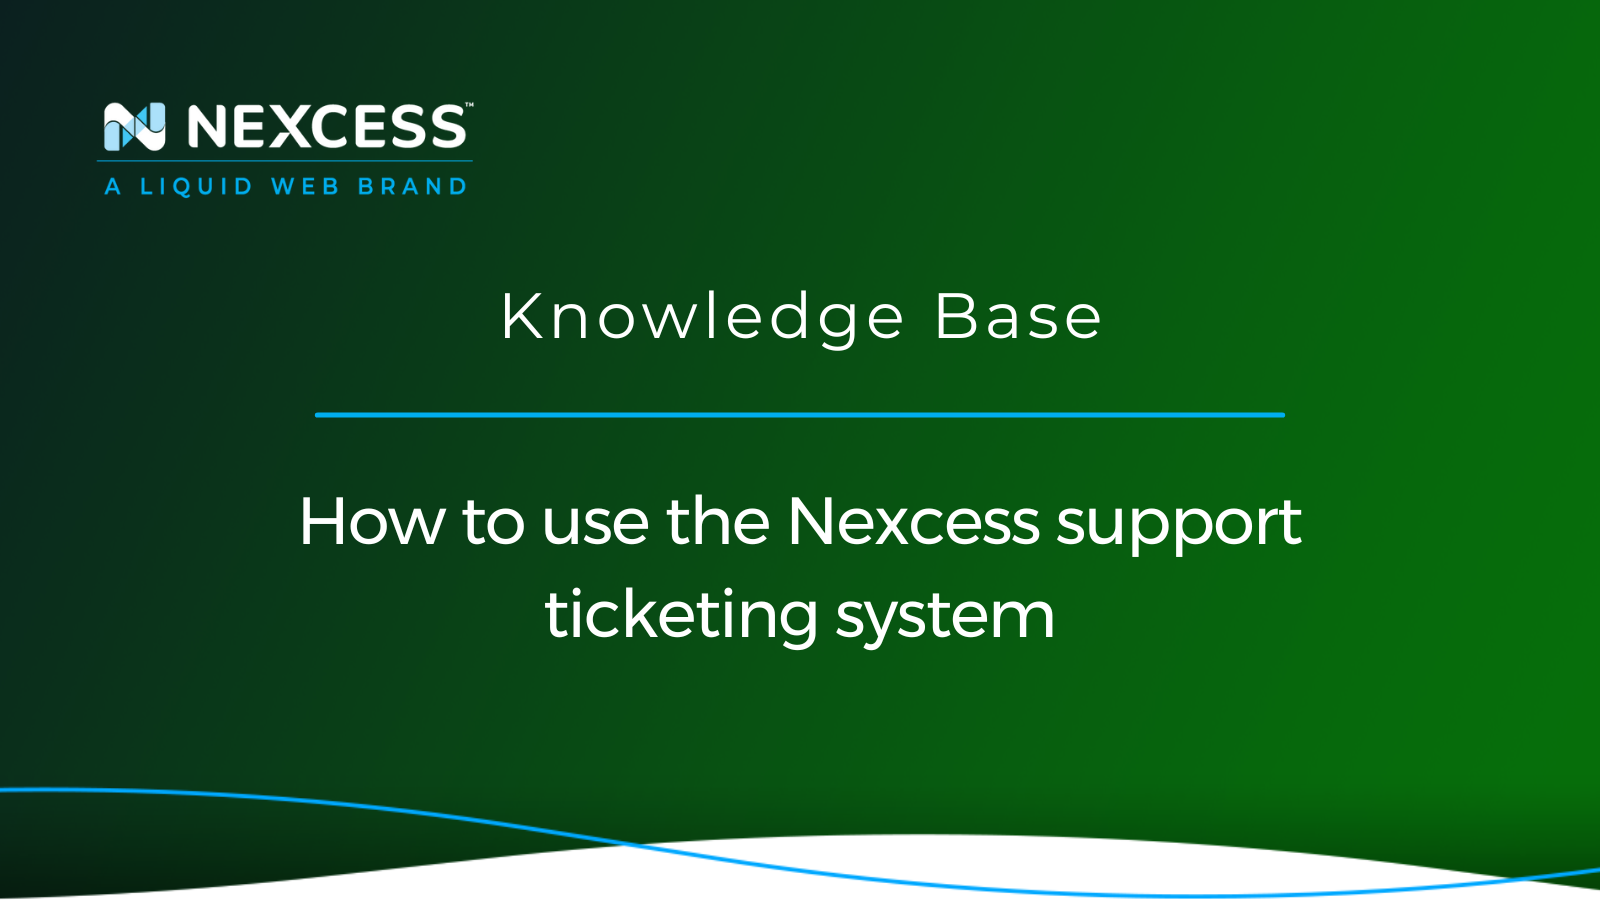 How to use the Nexcess support ticketing system